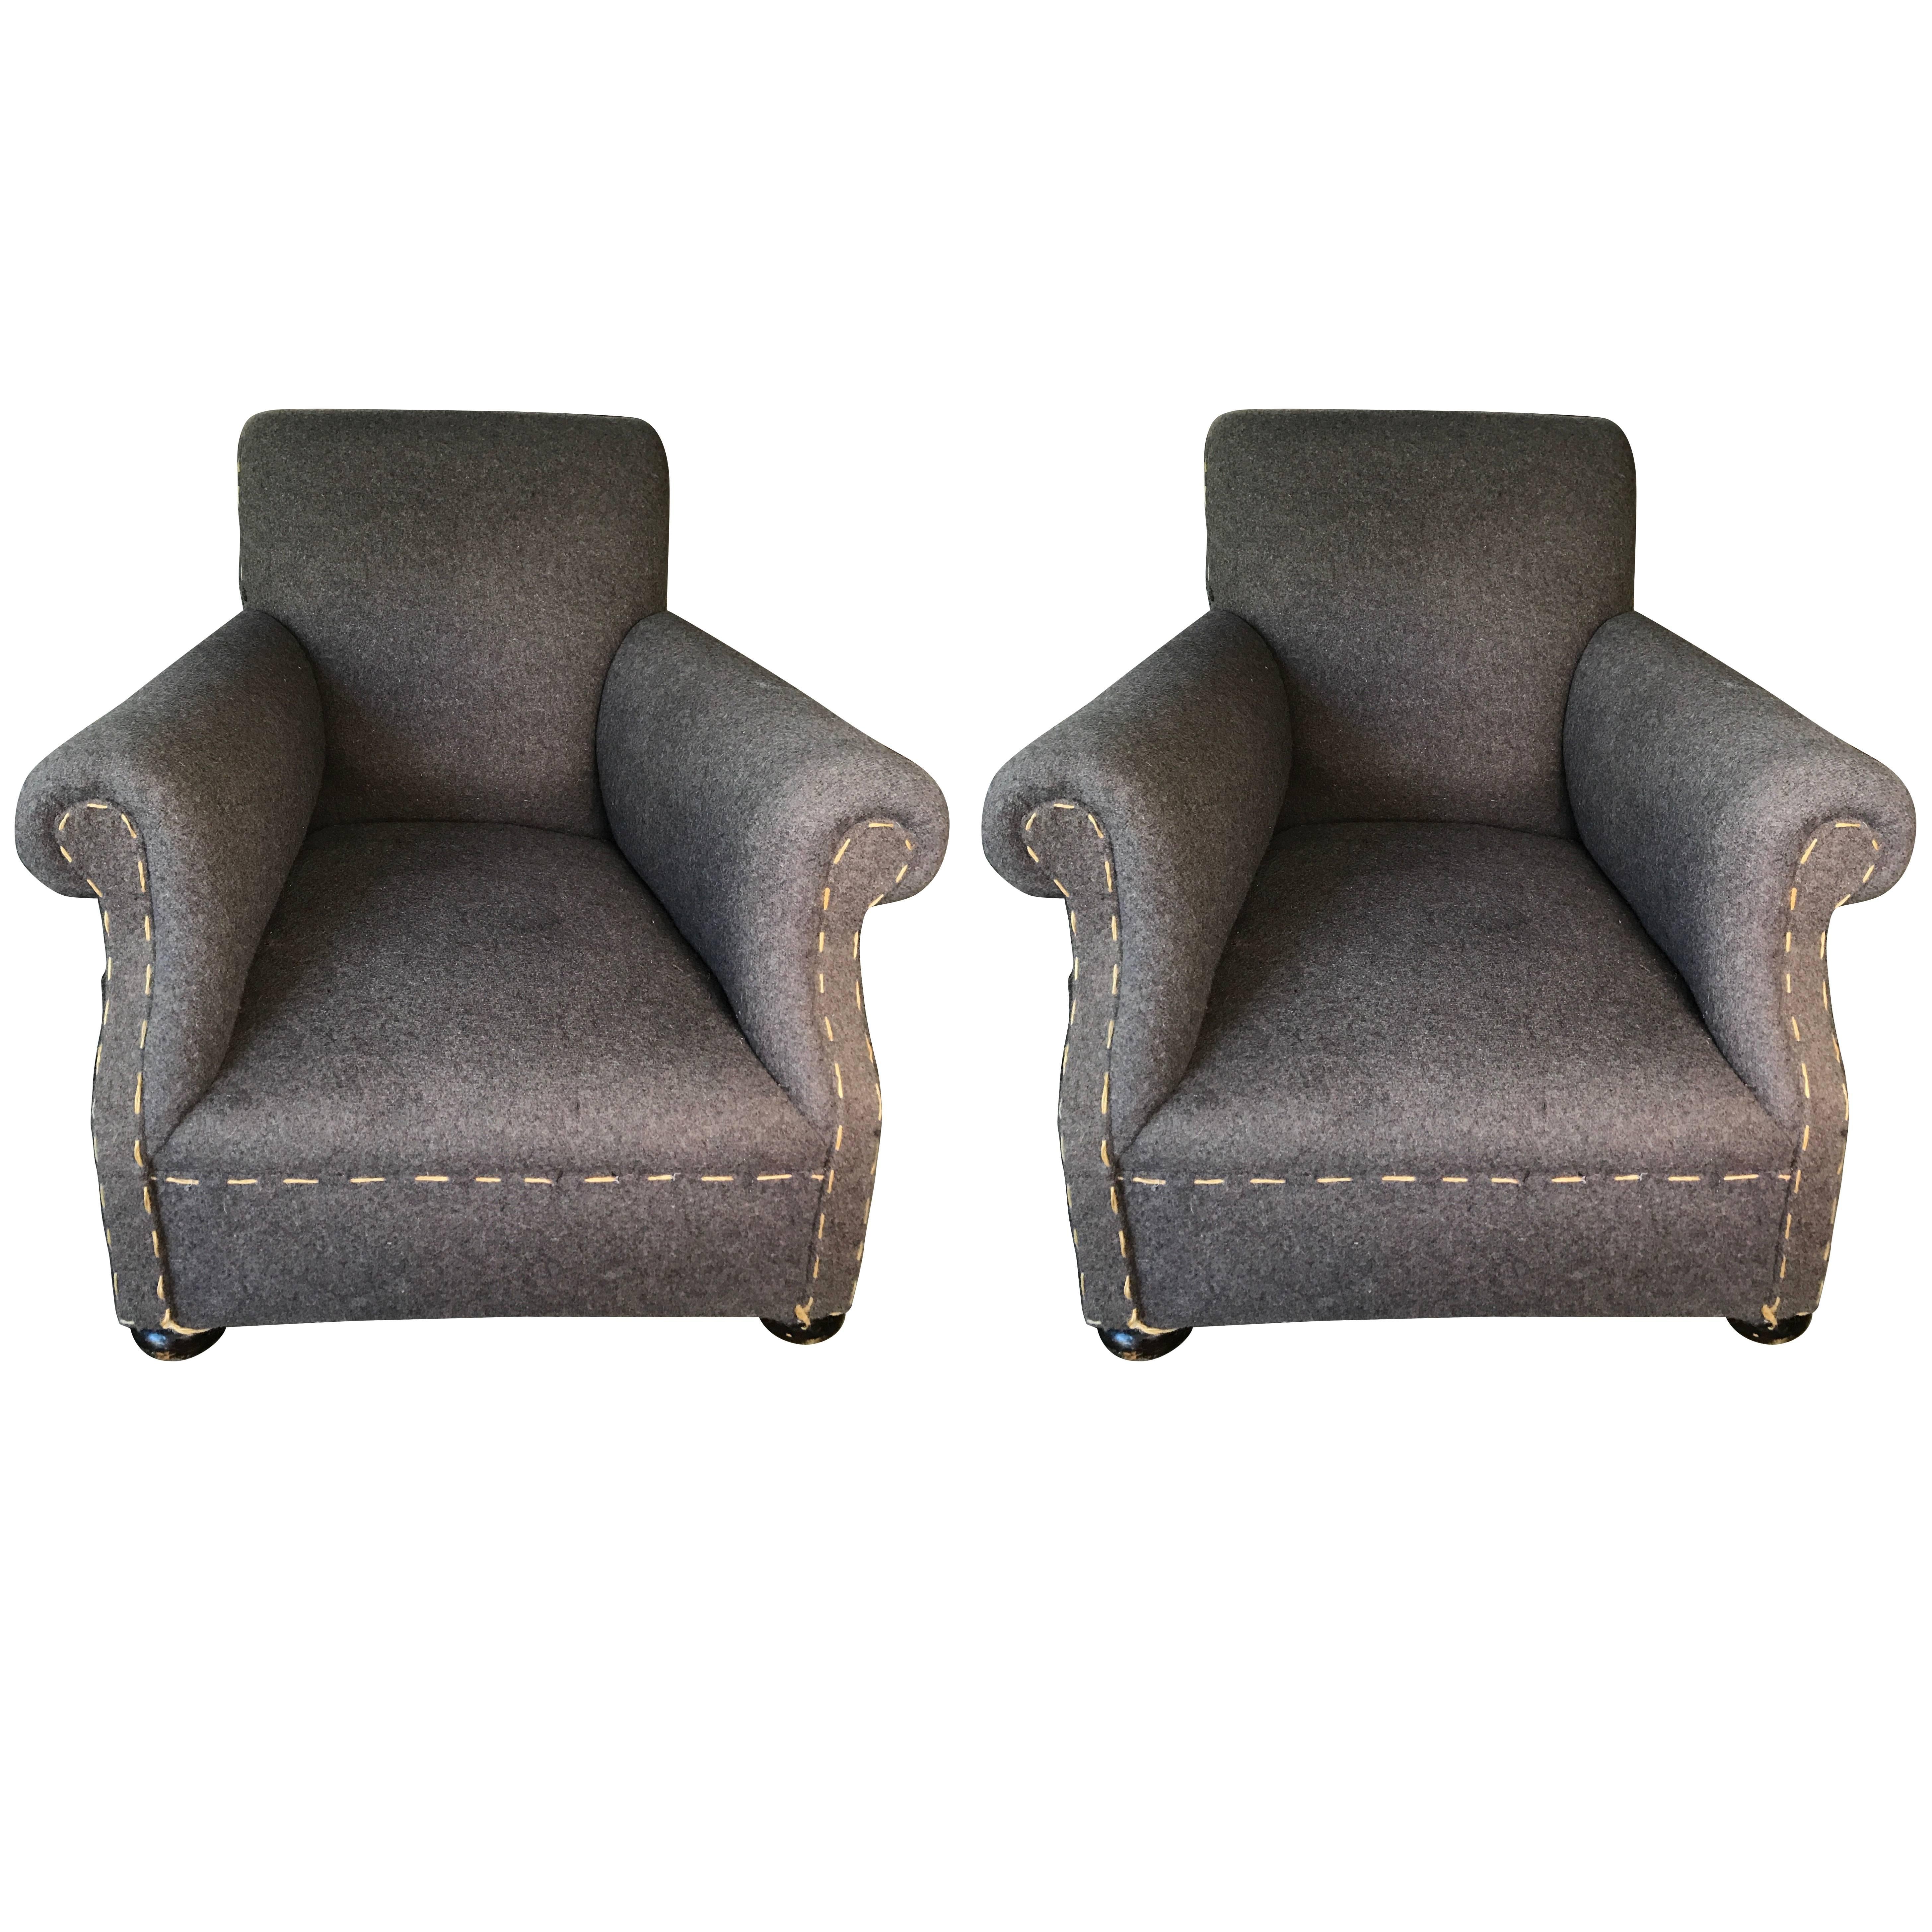 Pair of Wool English Rolled Arm Club Chairs